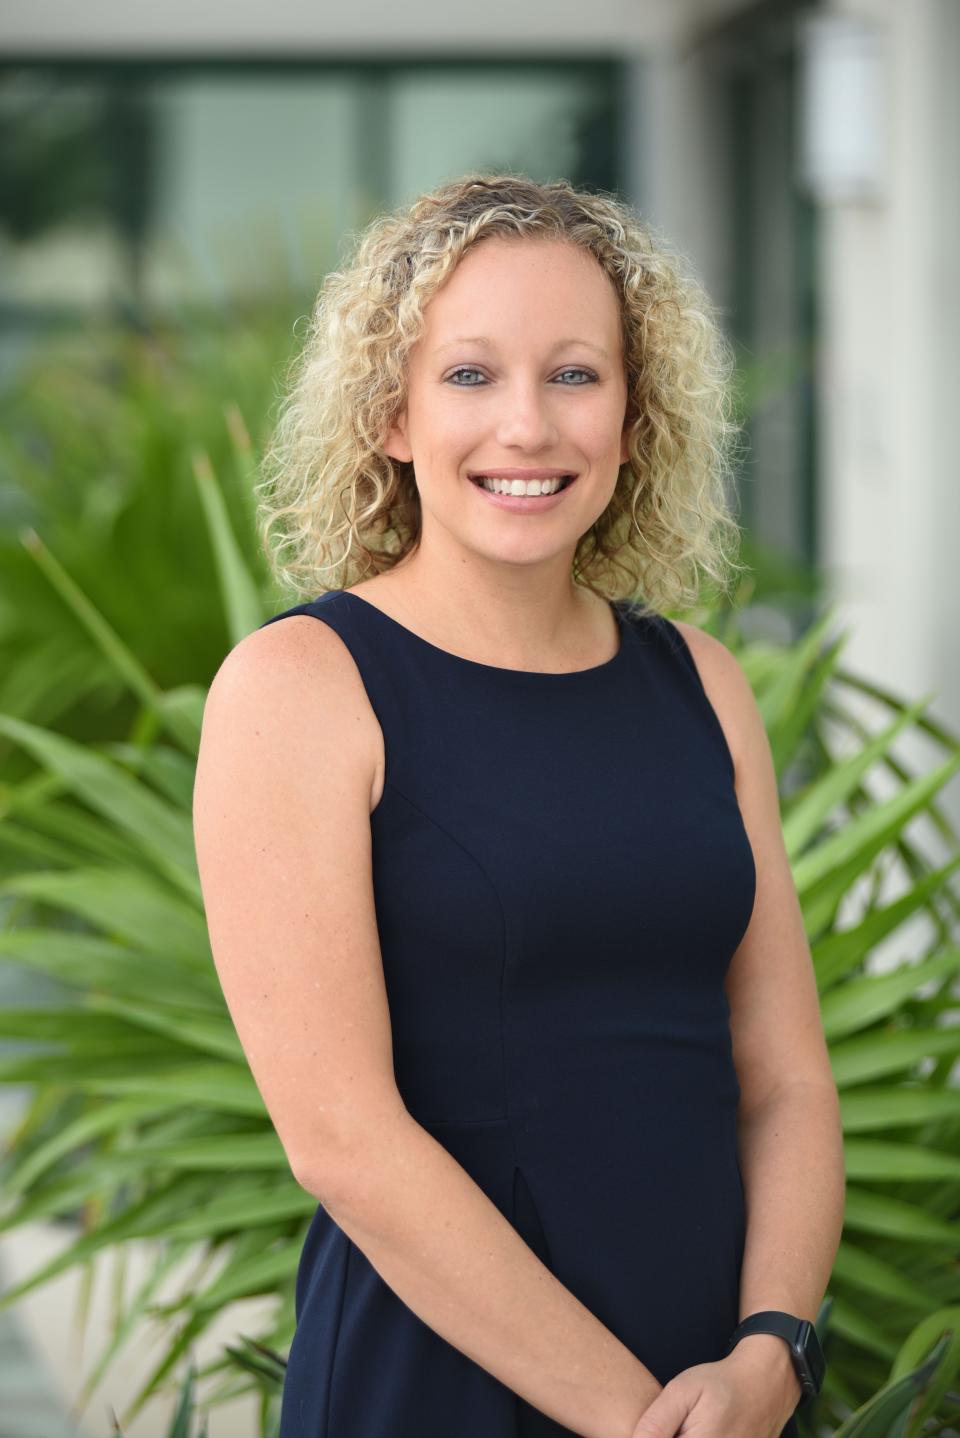 Brittany Lamont has been named president and CEO of the Lakewood Ranch Business Alliance.